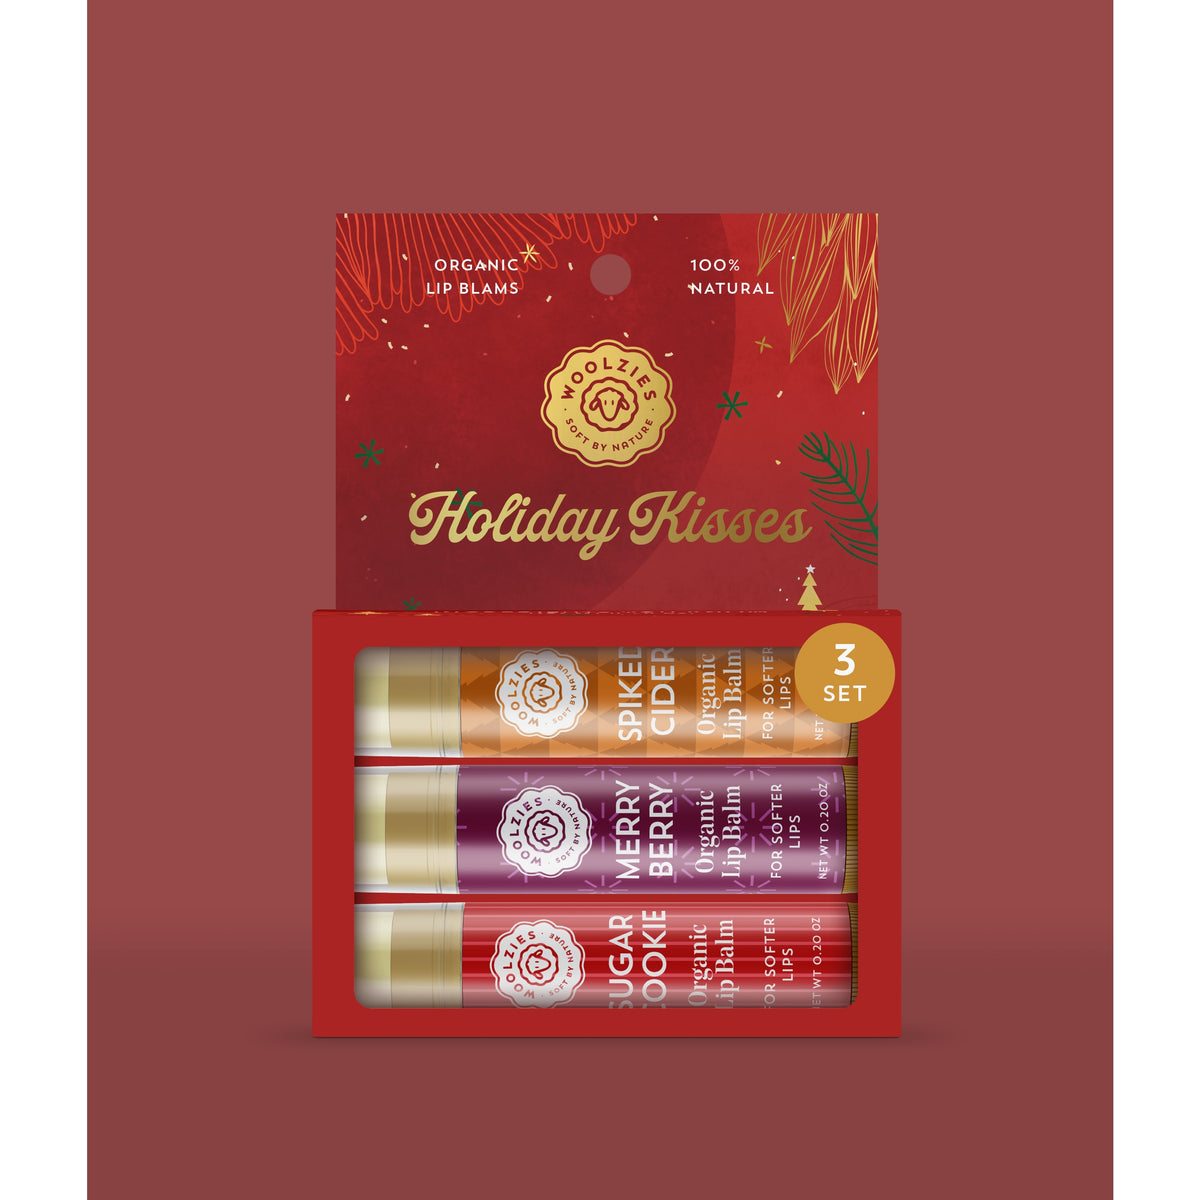 A pack of three Woolzies Holiday Kisses Organic Lip Balms with flavors "sugar cookie," "berry," and "spice" displayed in a festive red and gold cardboard packaging.